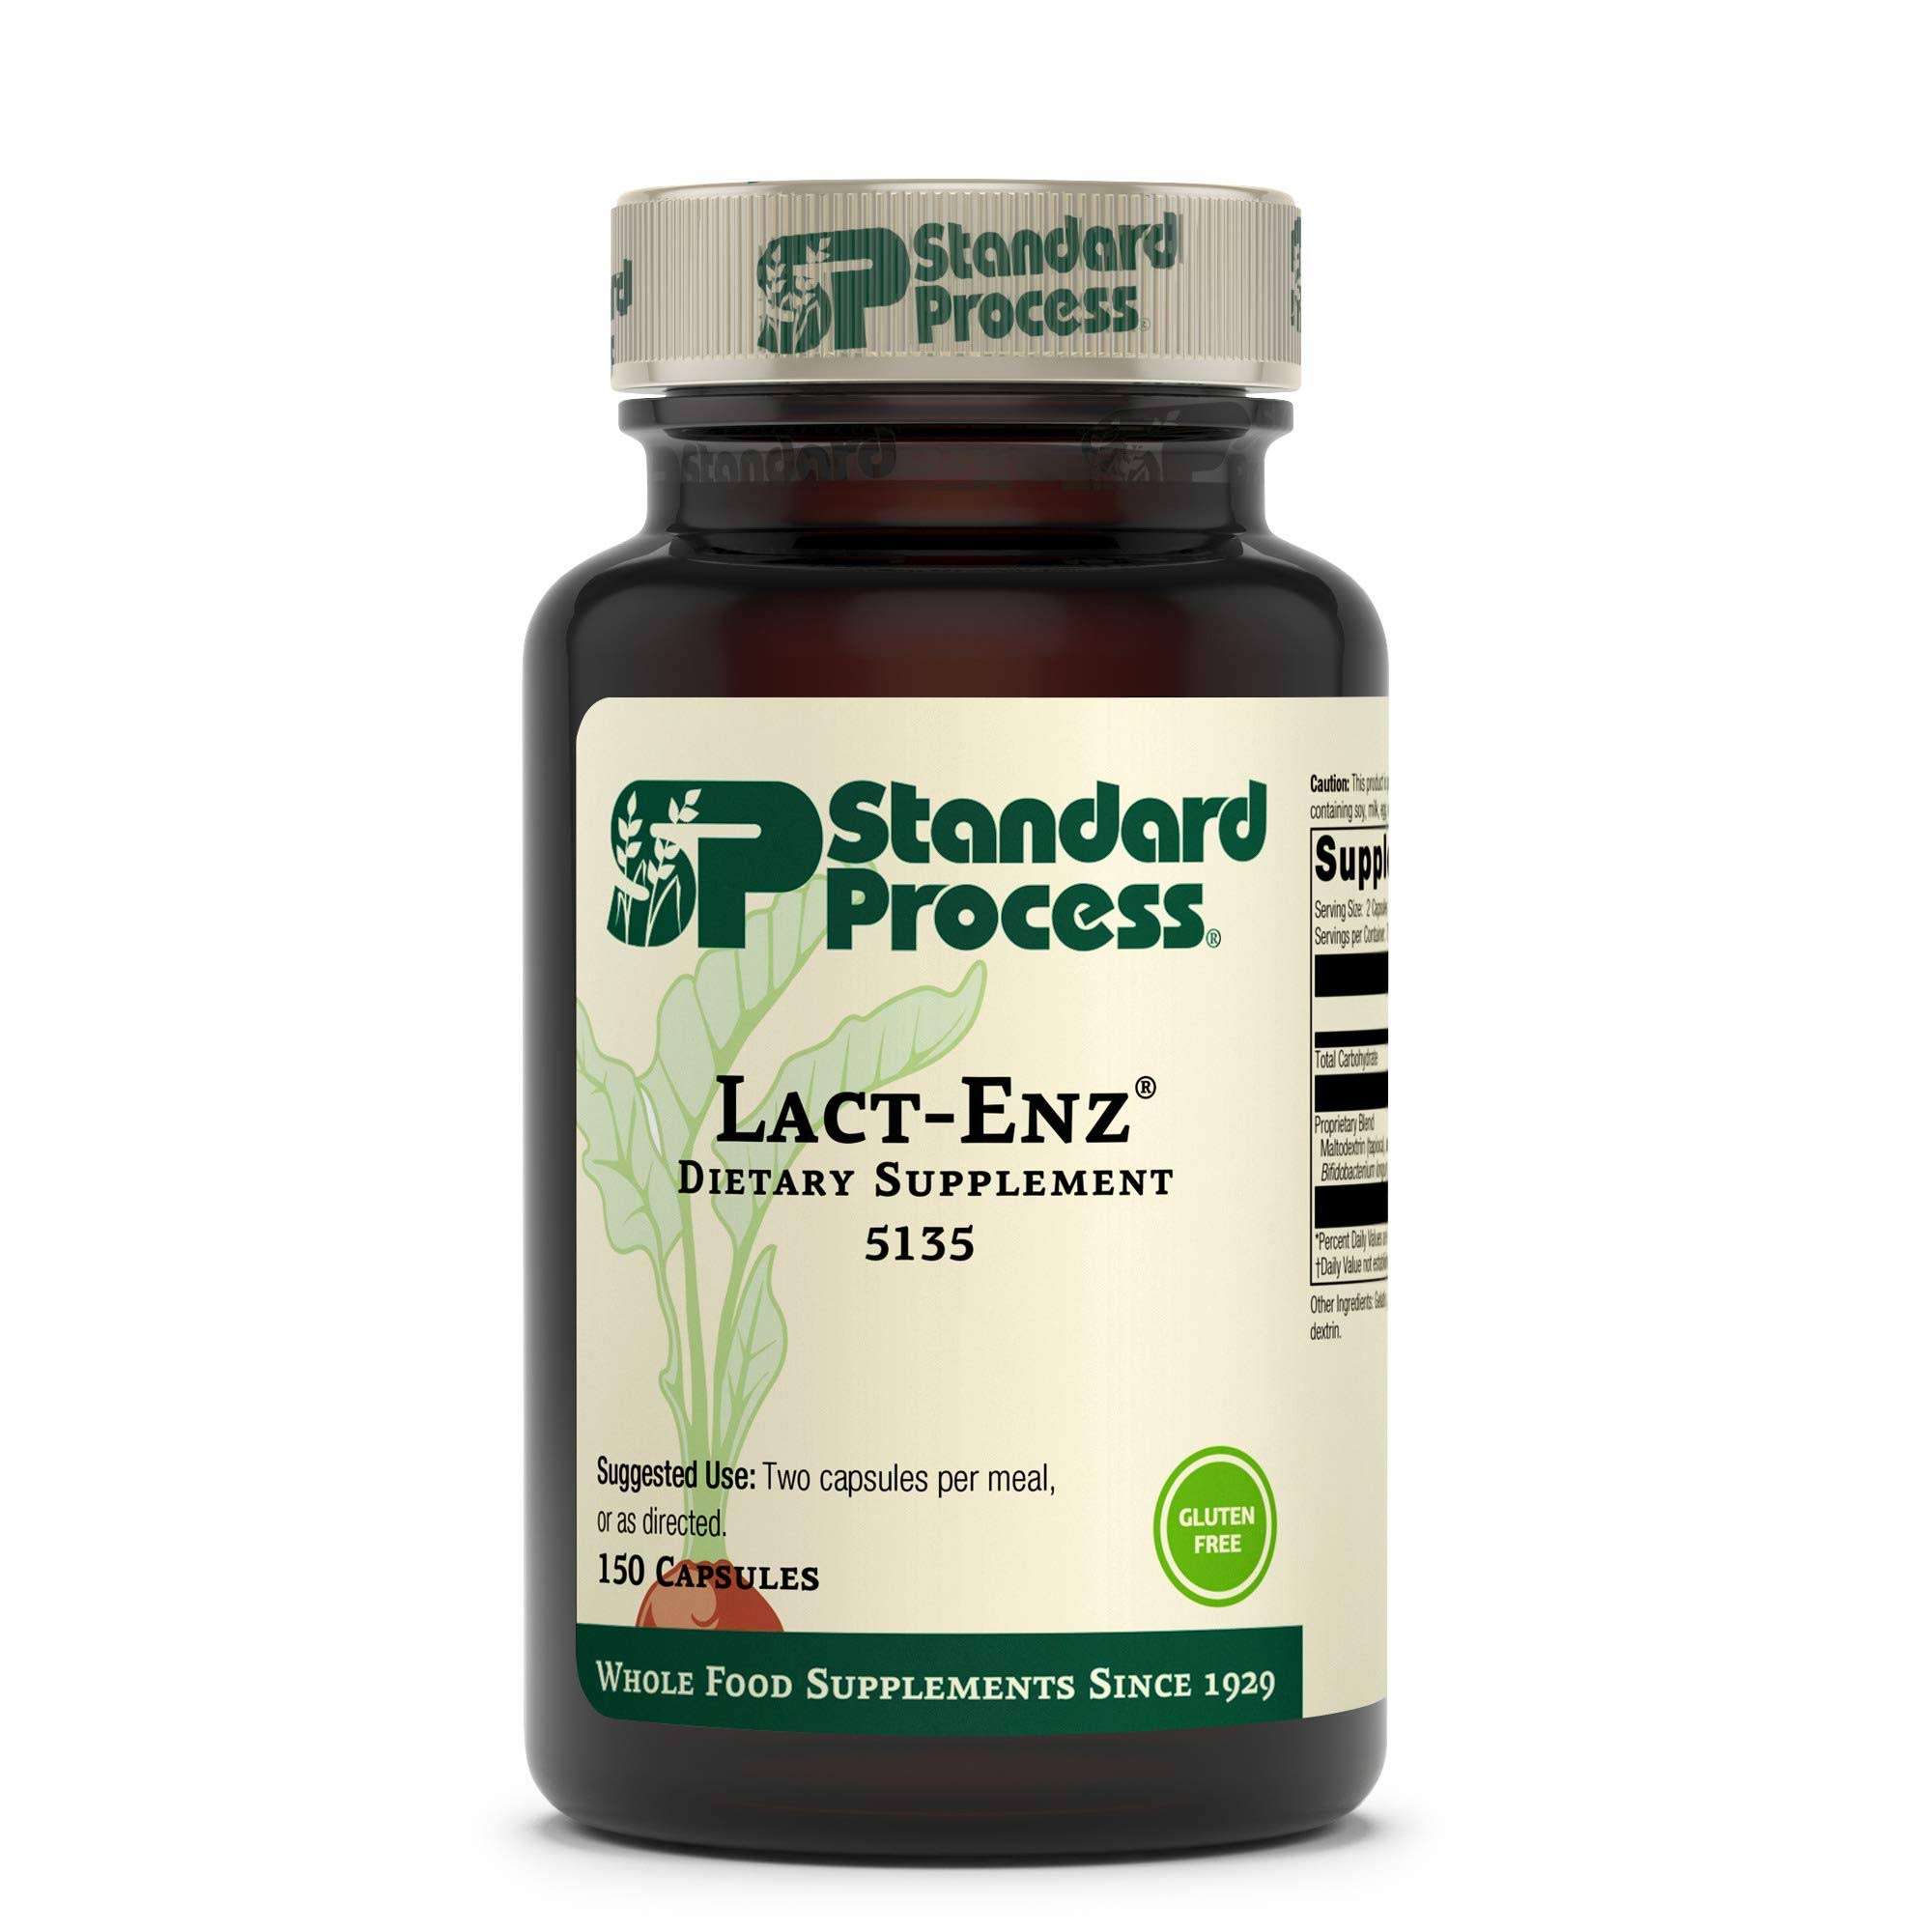 Standard Process Lact-ENZ - Whole Food Immune Support, Digestion and D